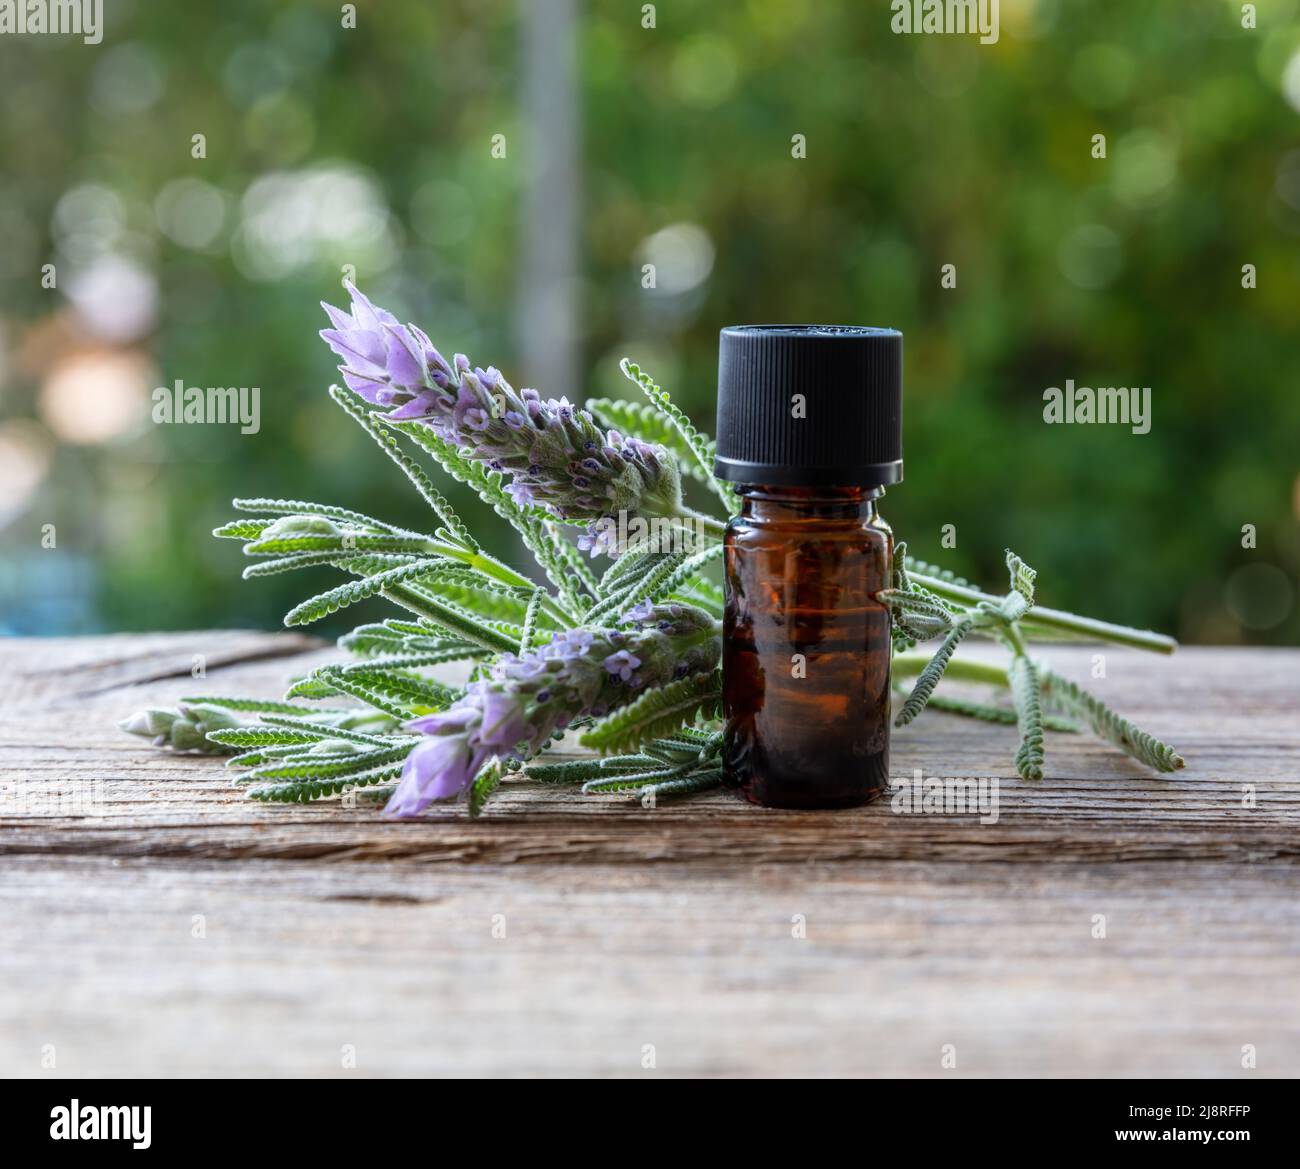 Lavender essential oil glass bottle on wooden table, close up view, copy space. Aromatherapy blooming herb, blur nature background Stock Photo